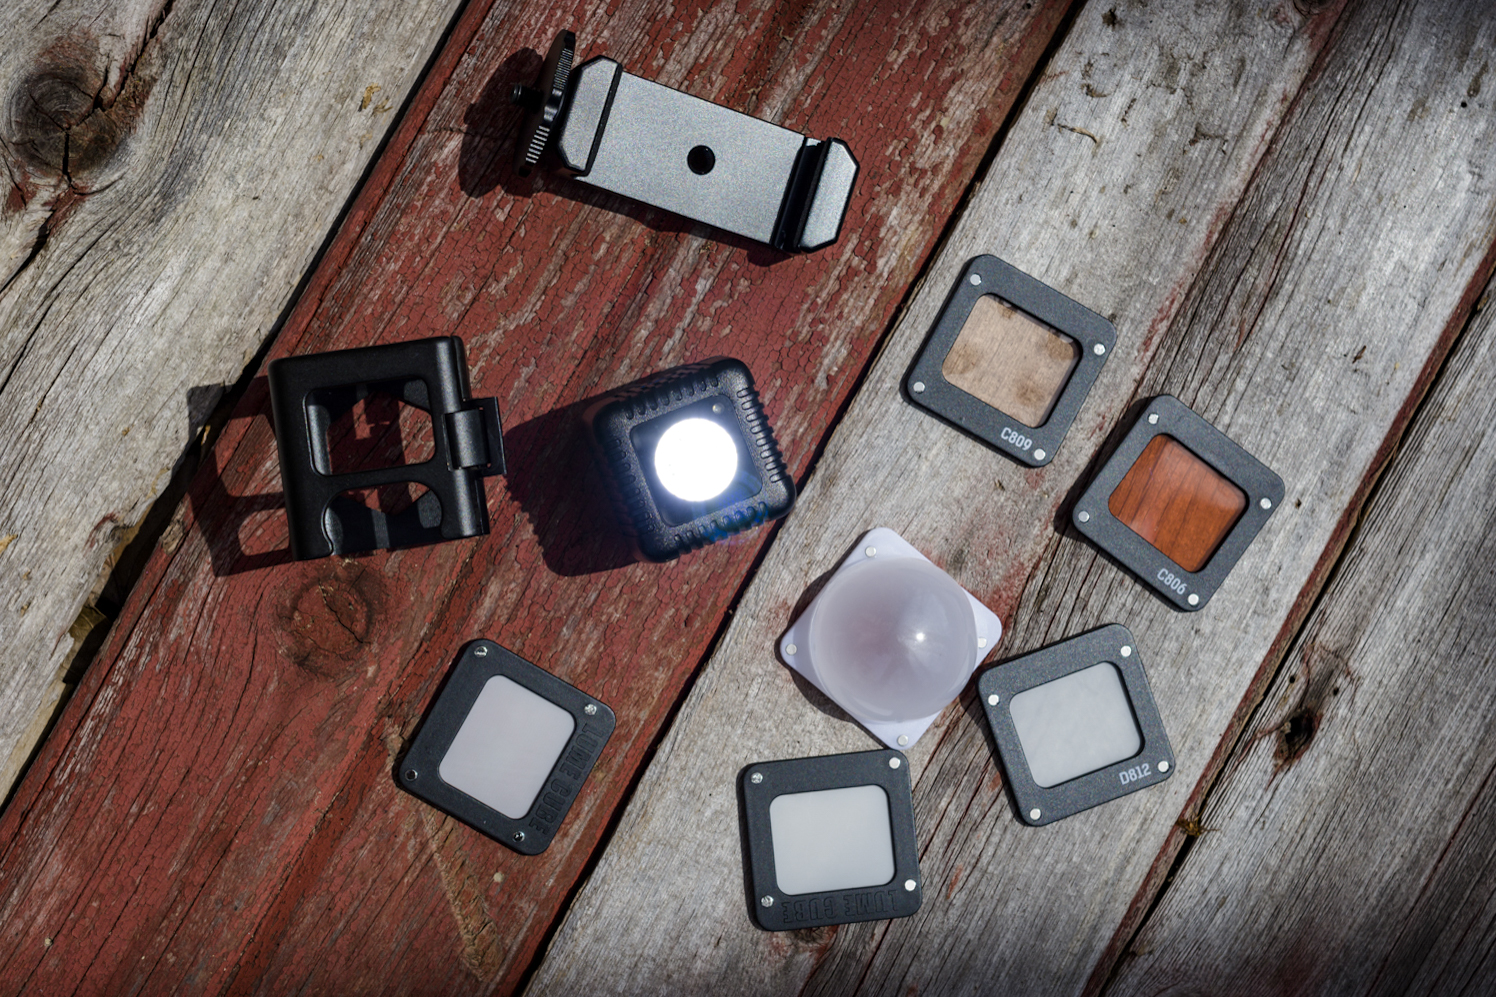 The Lume Cube is a small light with huge creative potential